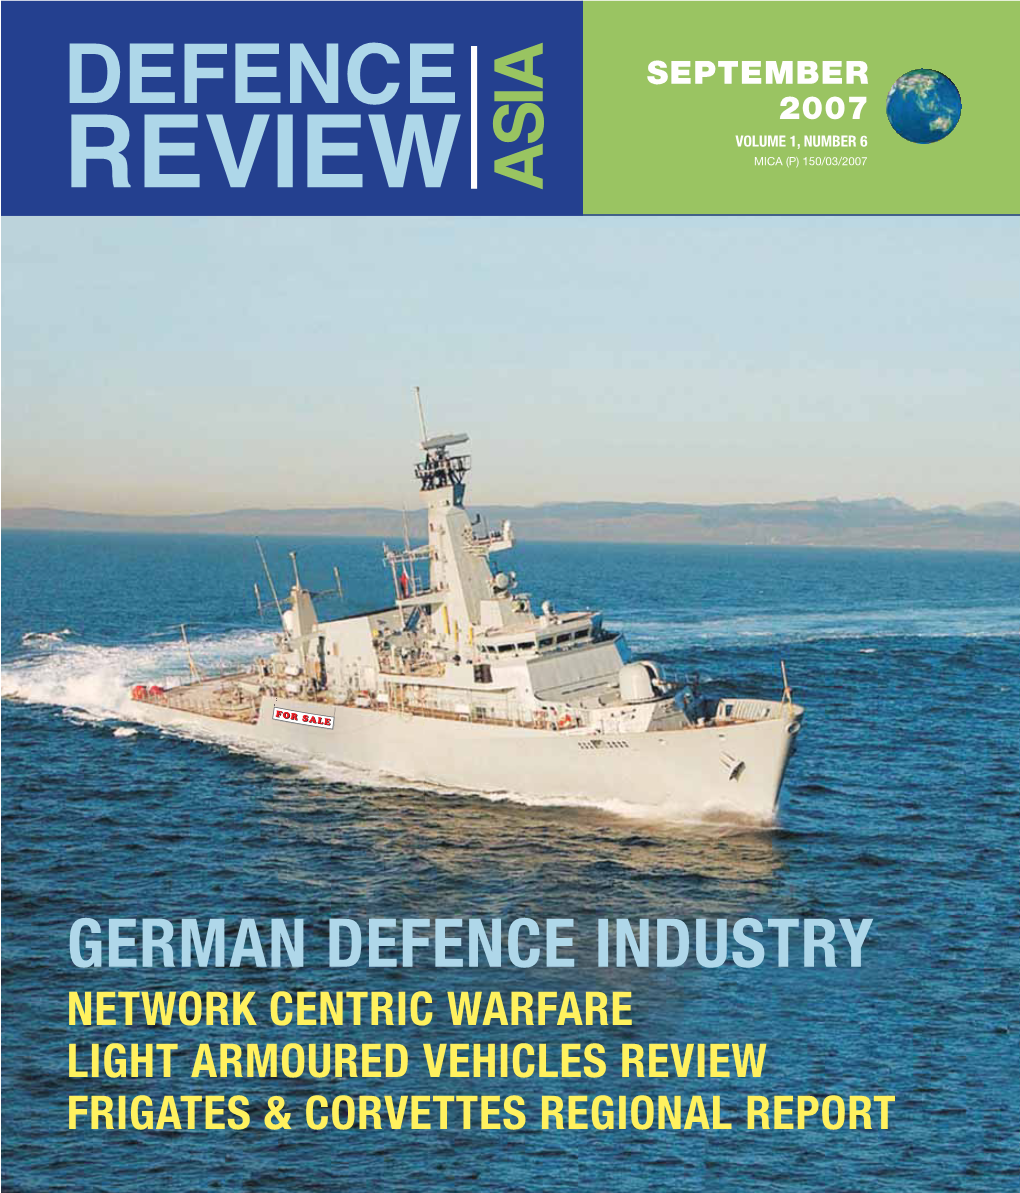 German Defence Industry Network Centric Warfare Light Armoured Vehicles Review Frigates & Corvettes Regional Report ).$5342)